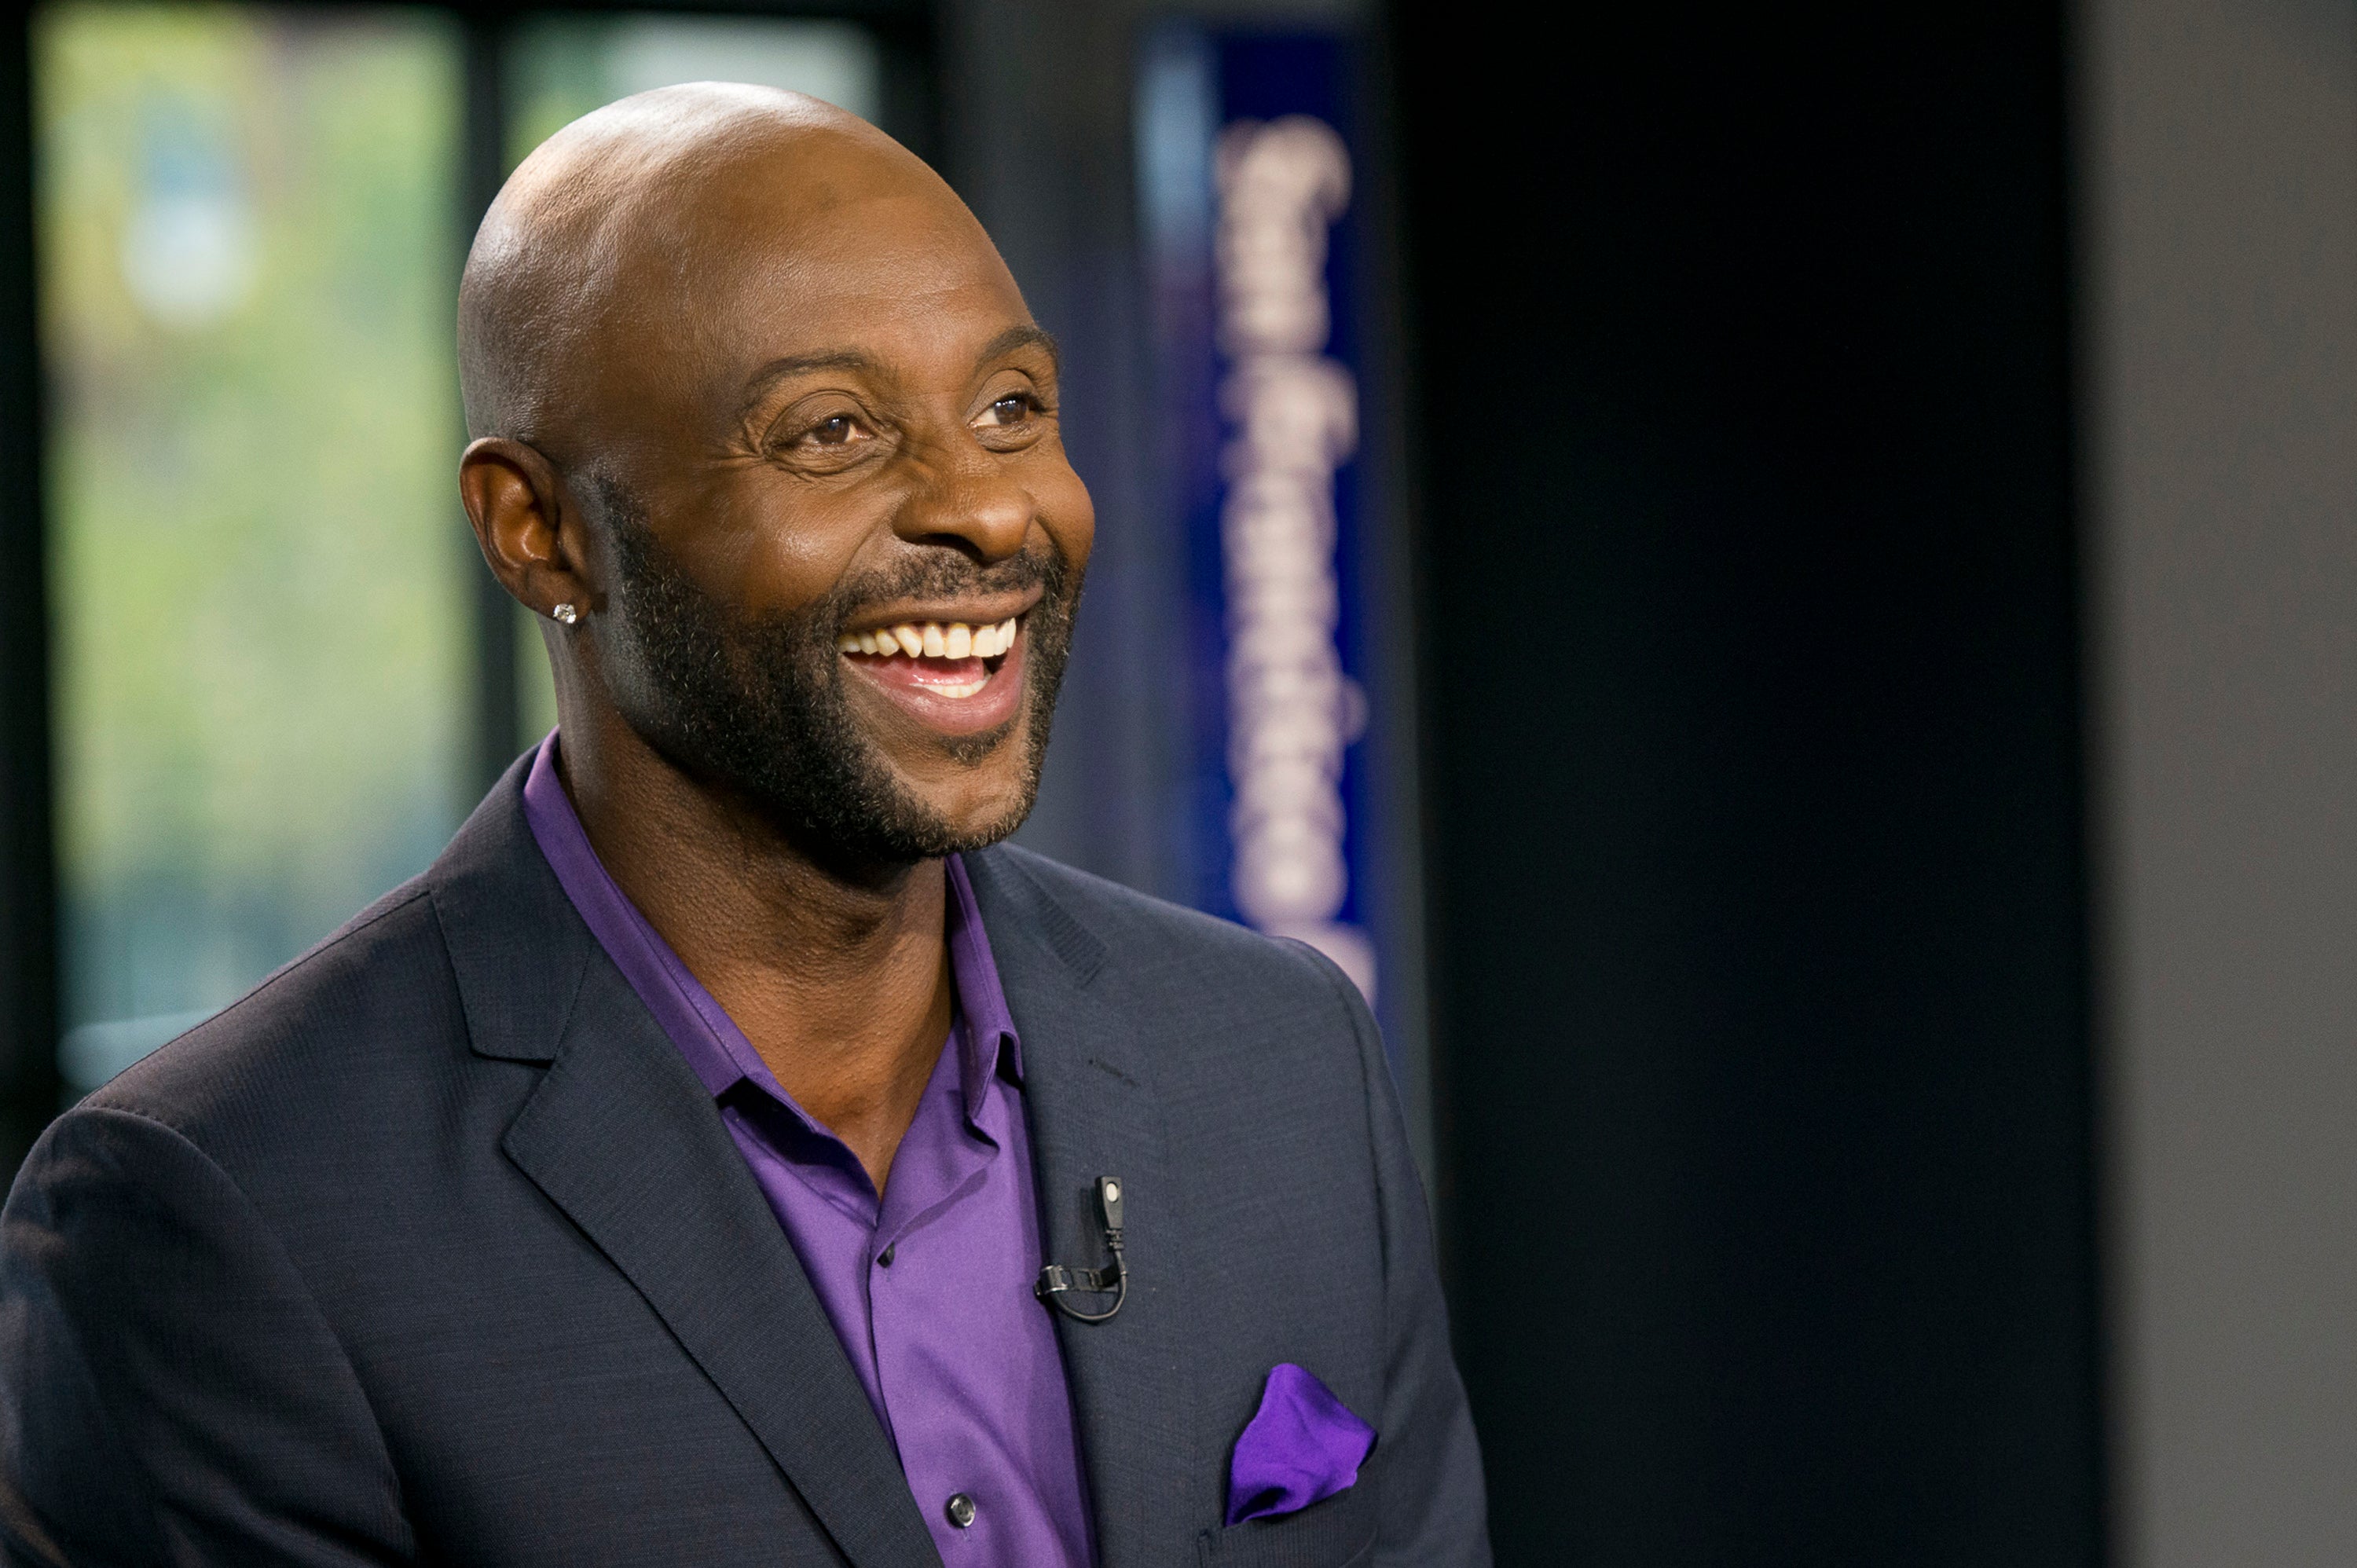 He Finally Gets It: Jerry Rice Apologizes For Saying "All Lives Matter"